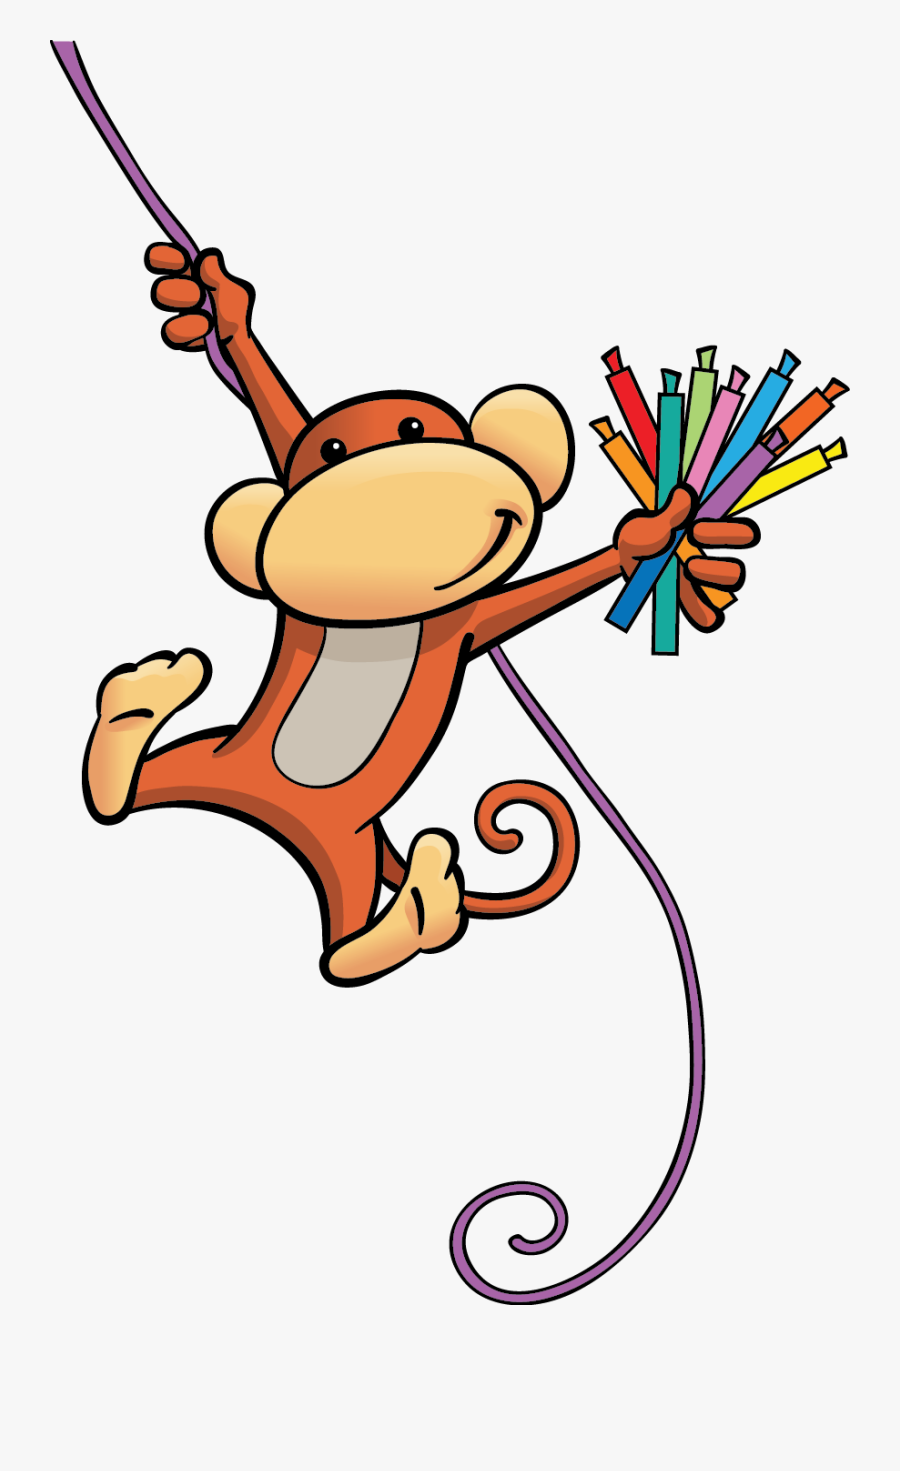 Discovery Doodles Your Ideas - Discovery Kids Turma Png, Transparent Clipart